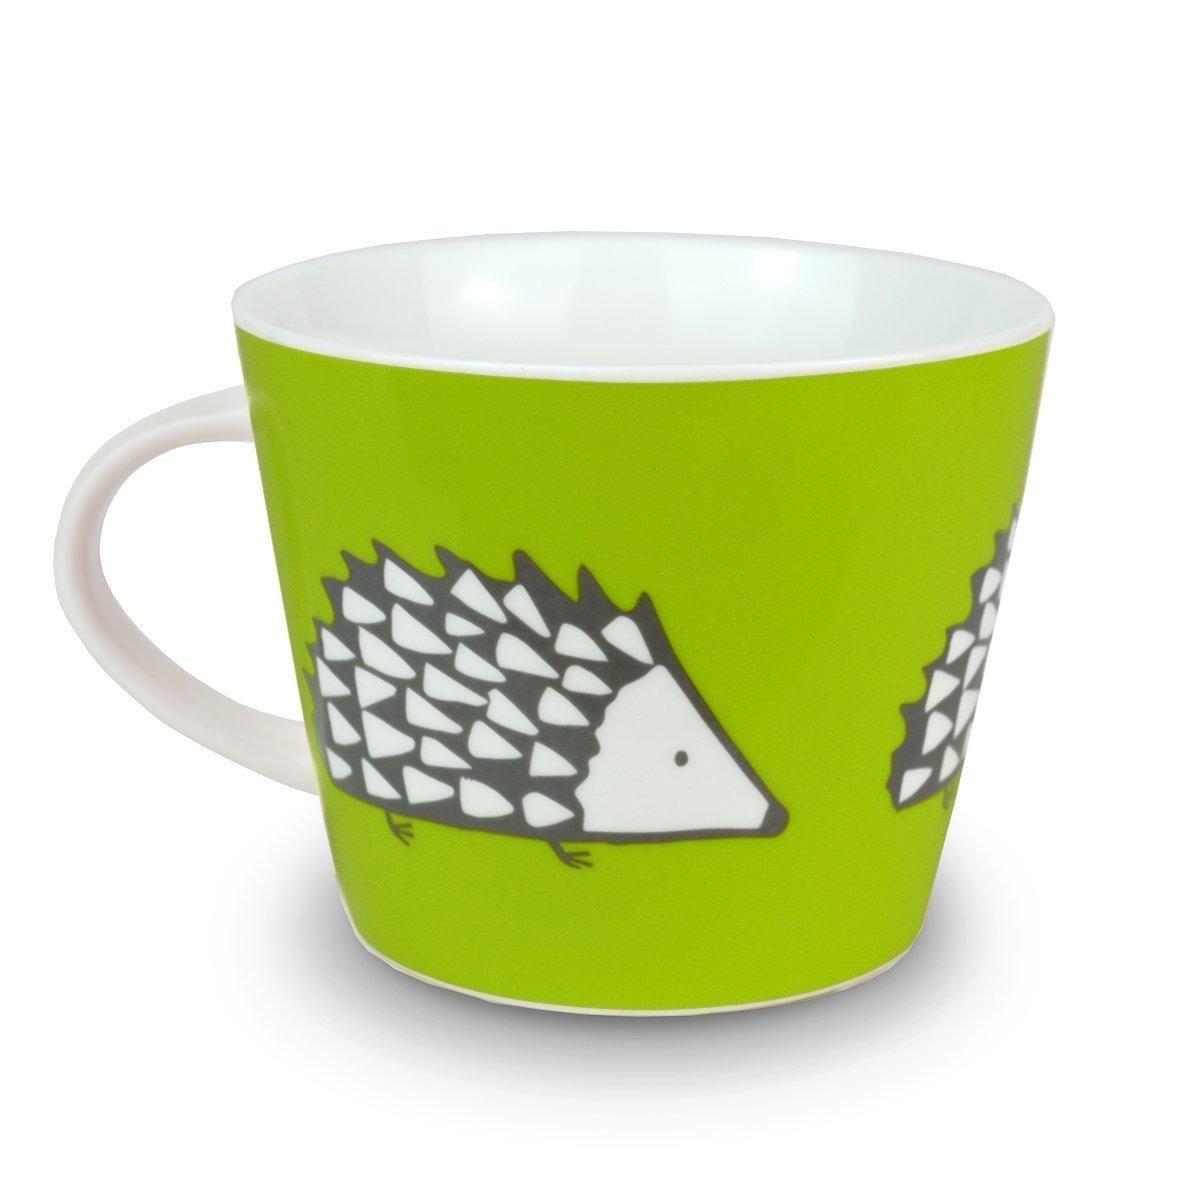  Mugs And Cups SC-0072 